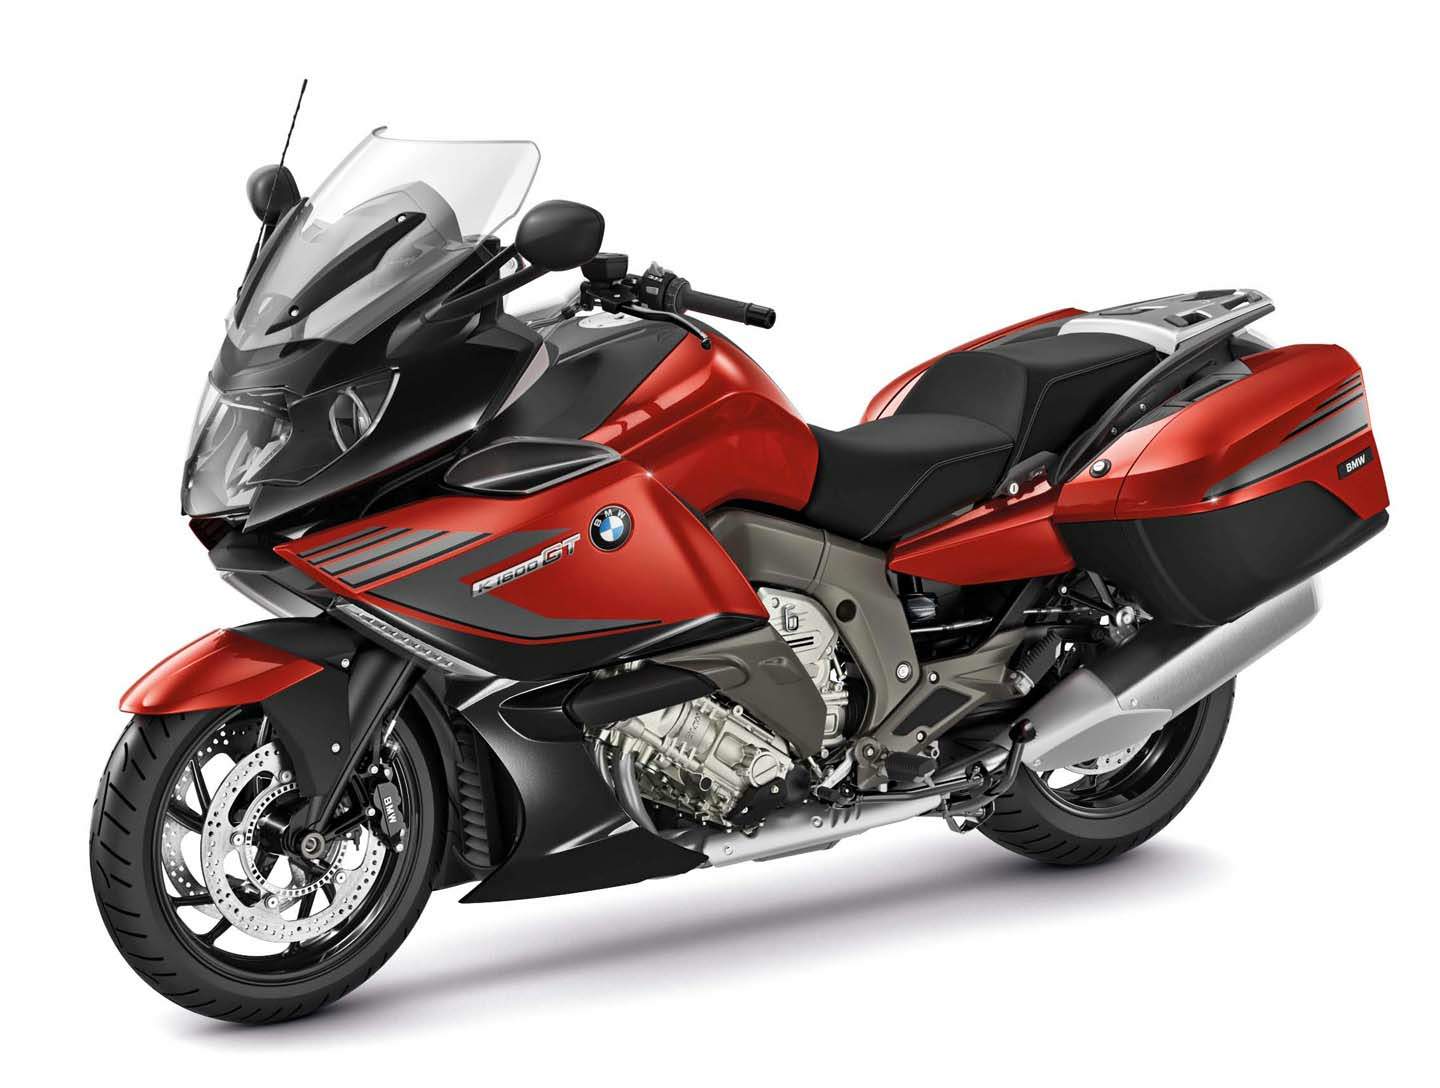 NEW BMW MOTORCYCLE WITH CONNECTEDRIDE POWERED BY VODAFONE